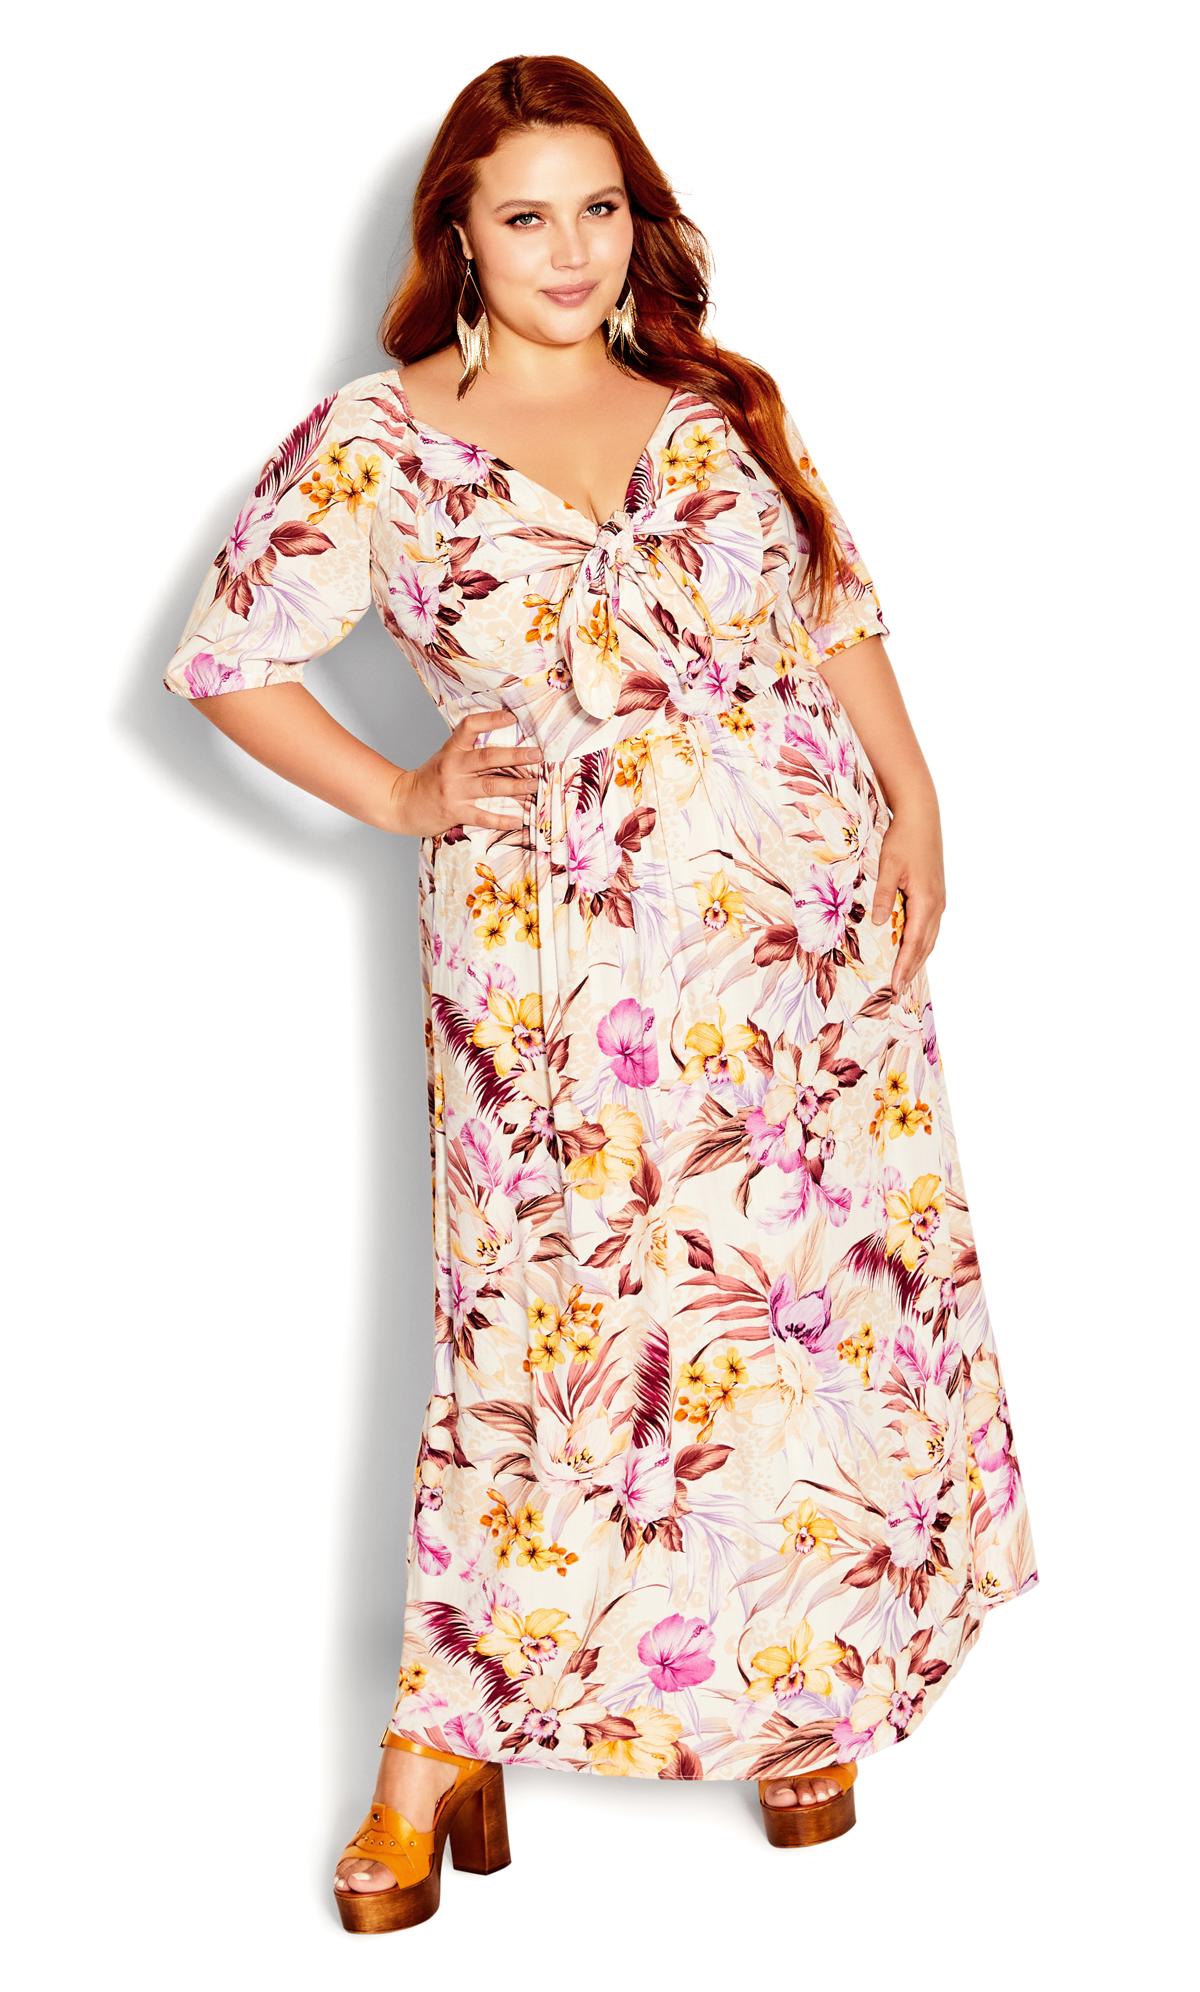 City Chic Ivory White Floral Print Maxi Dress 2